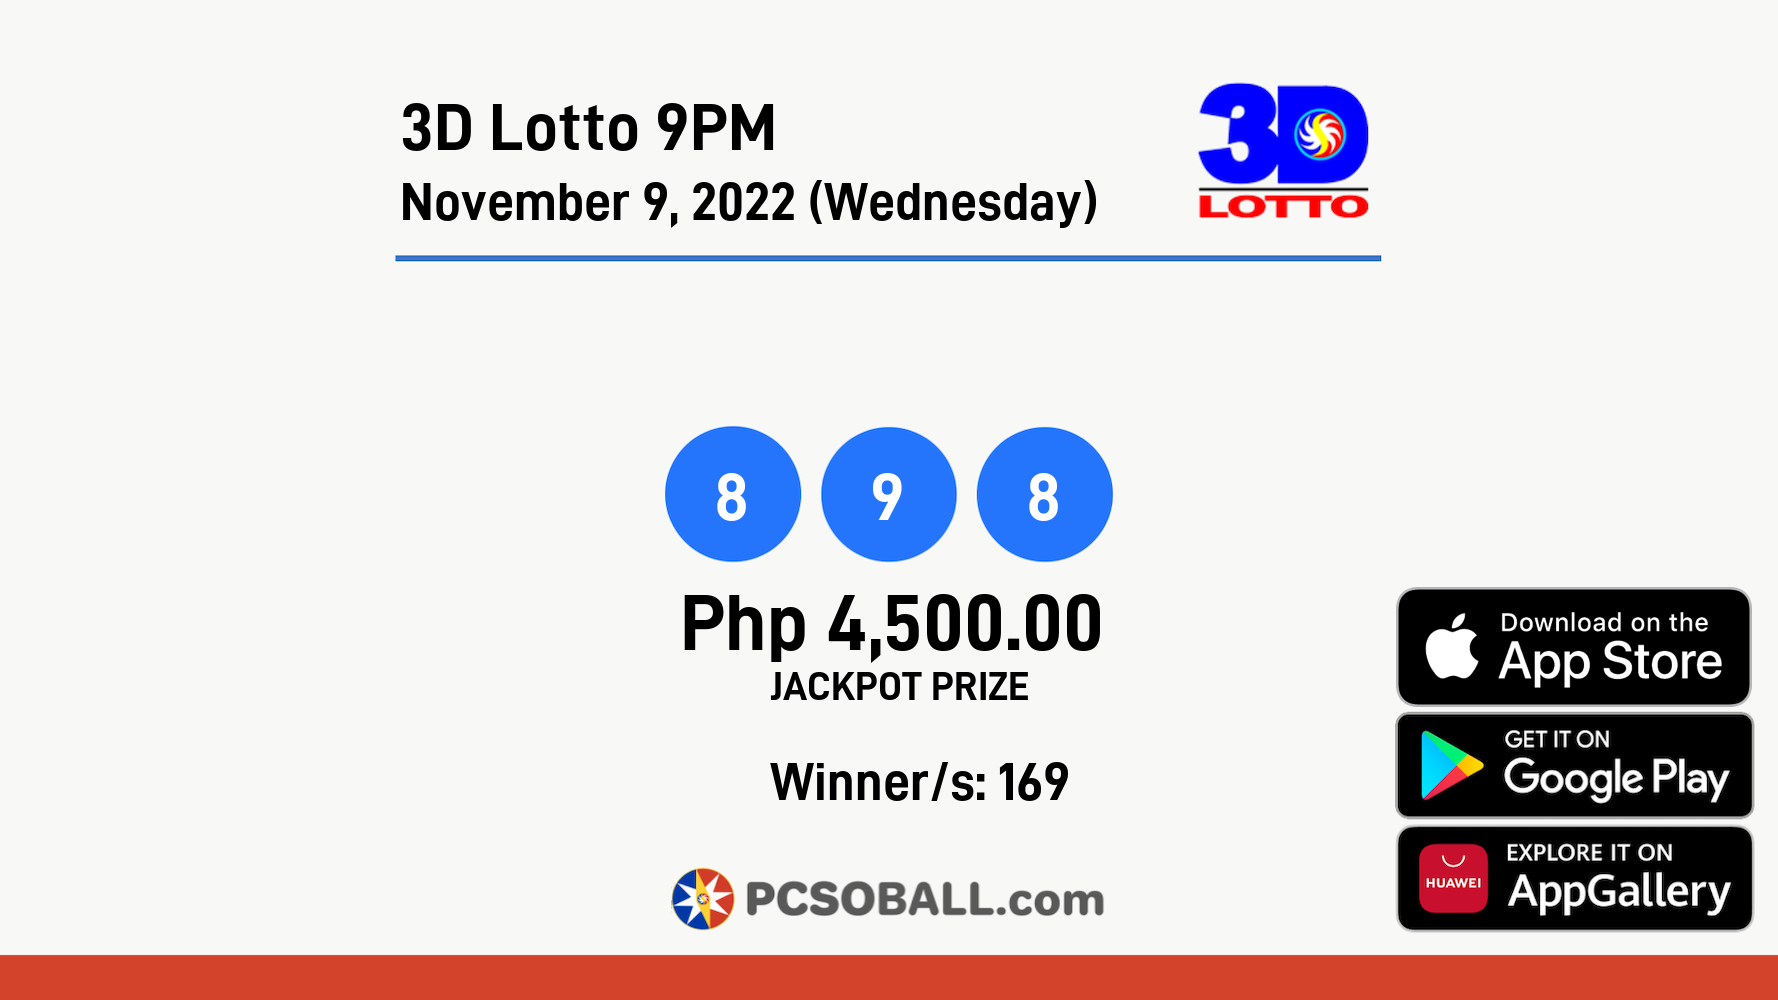 3D Lotto 9PM November 9, 2022 (Wednesday) Result